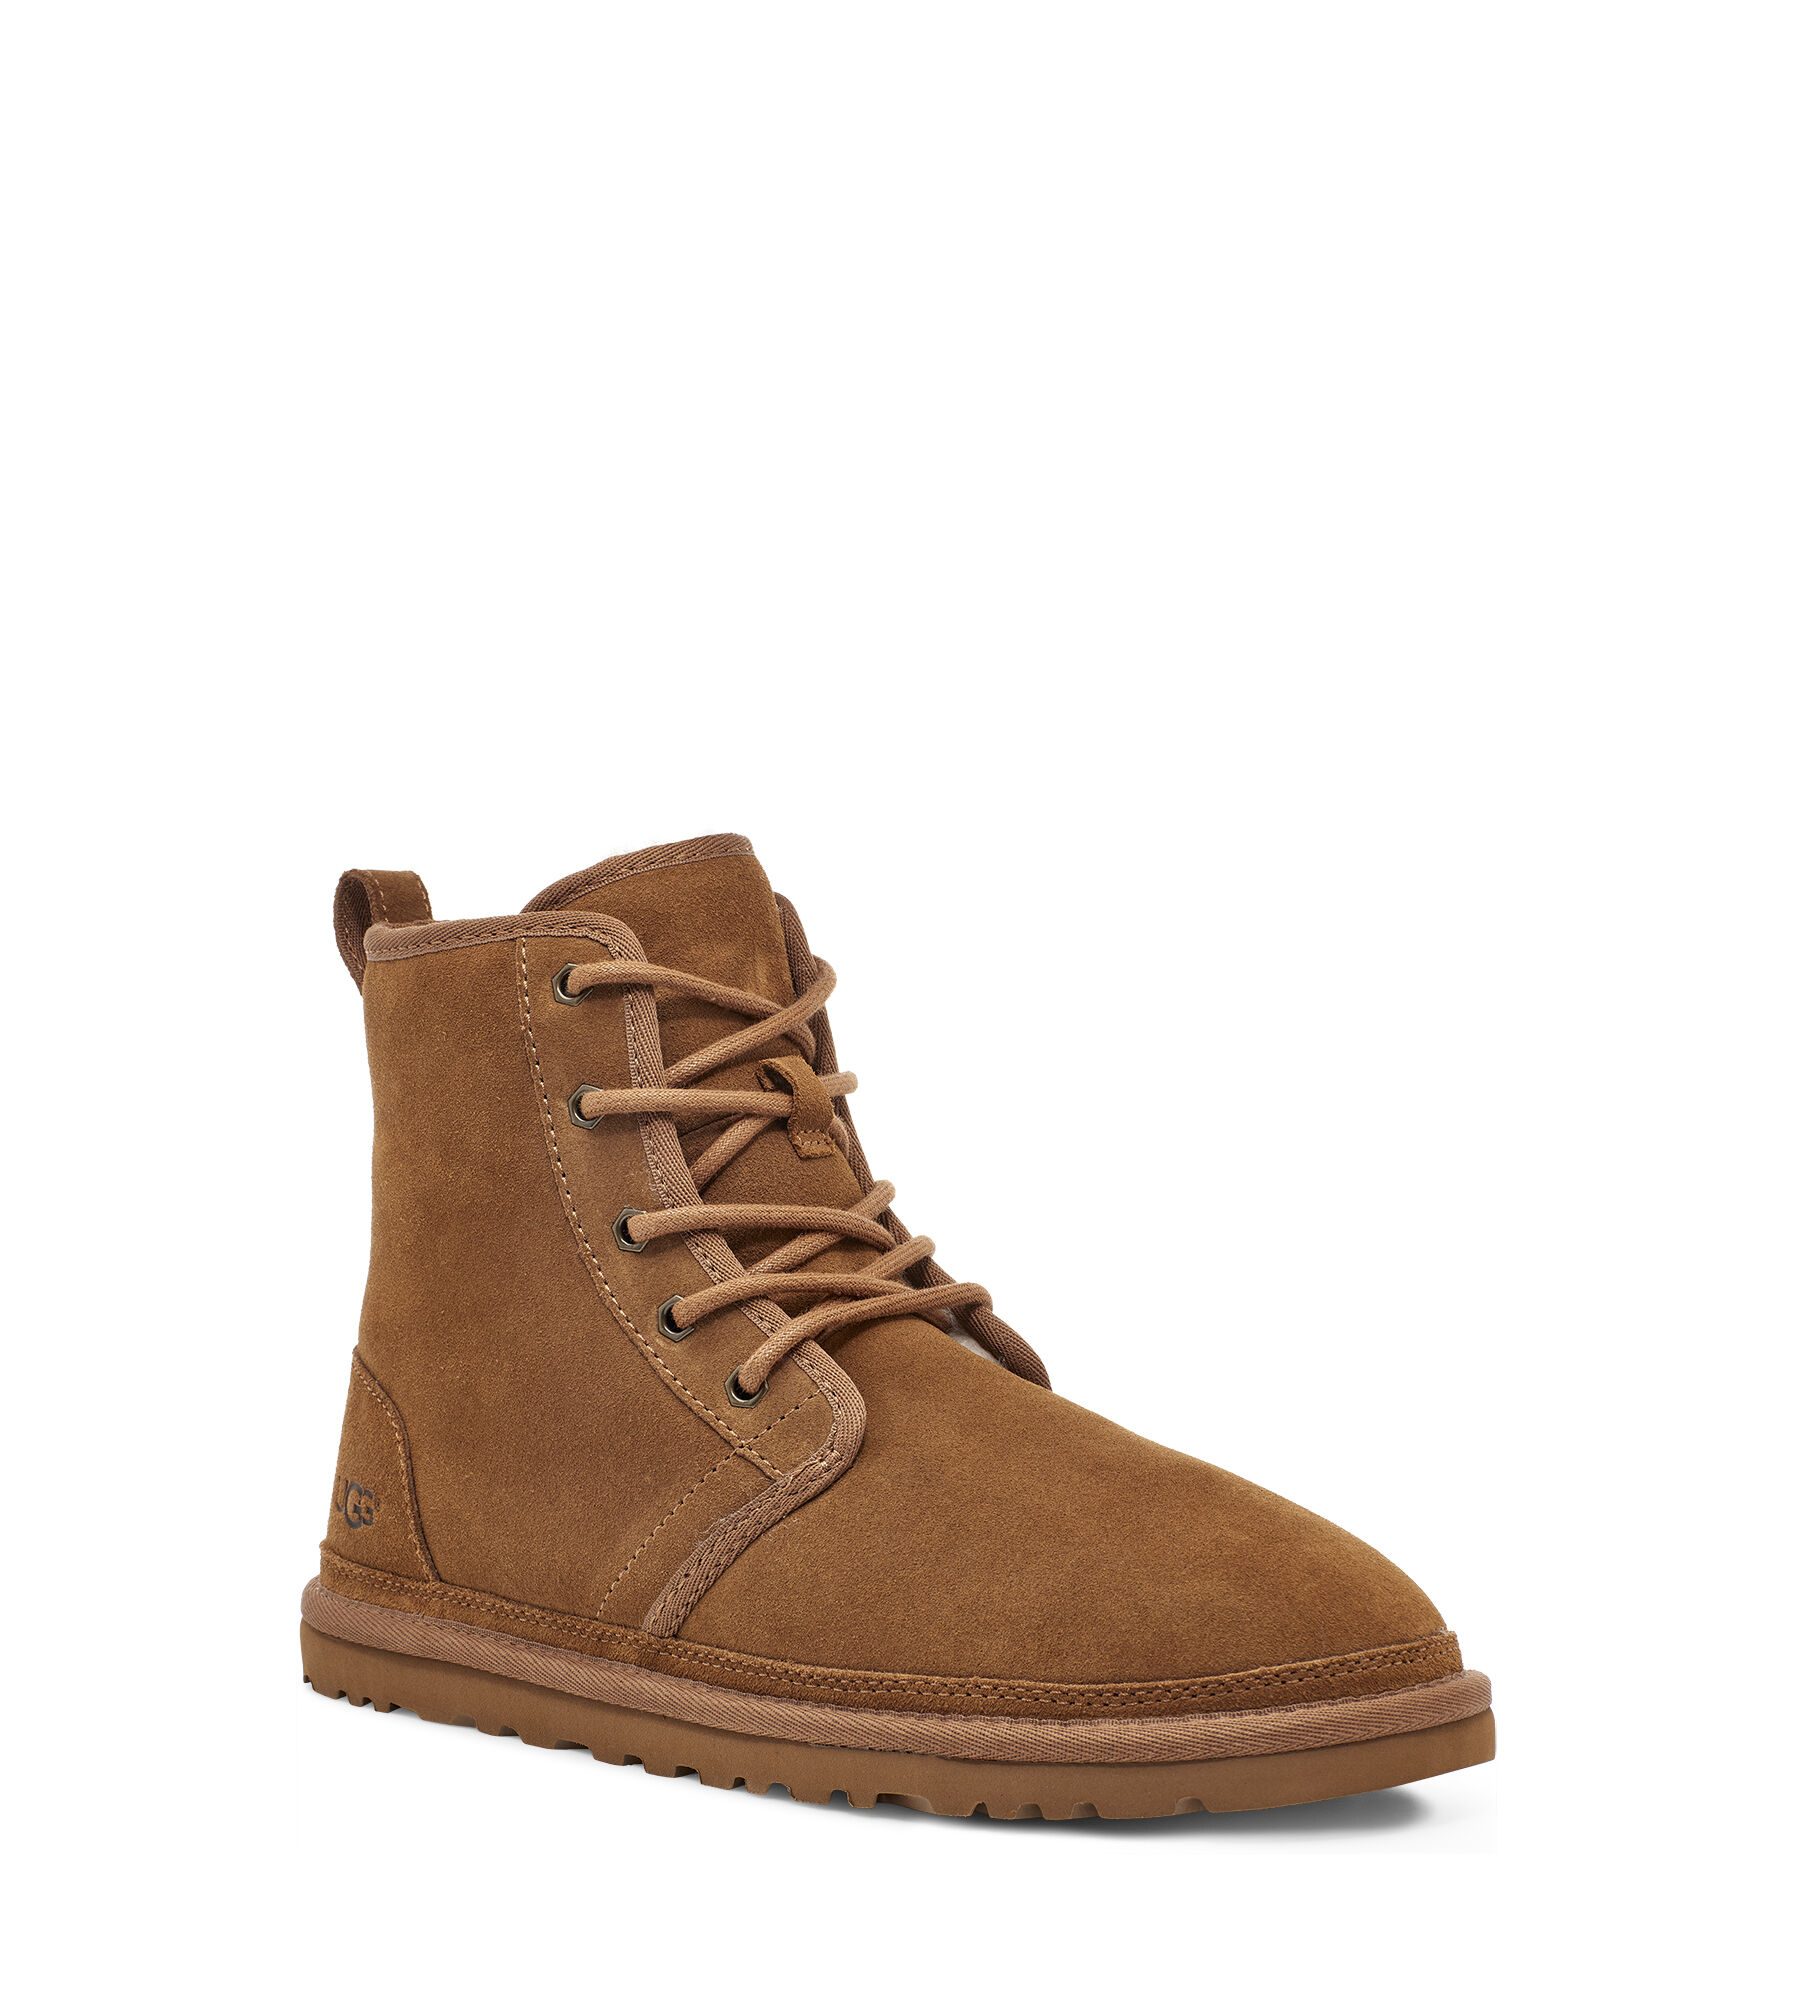 mens ugg boots on sale